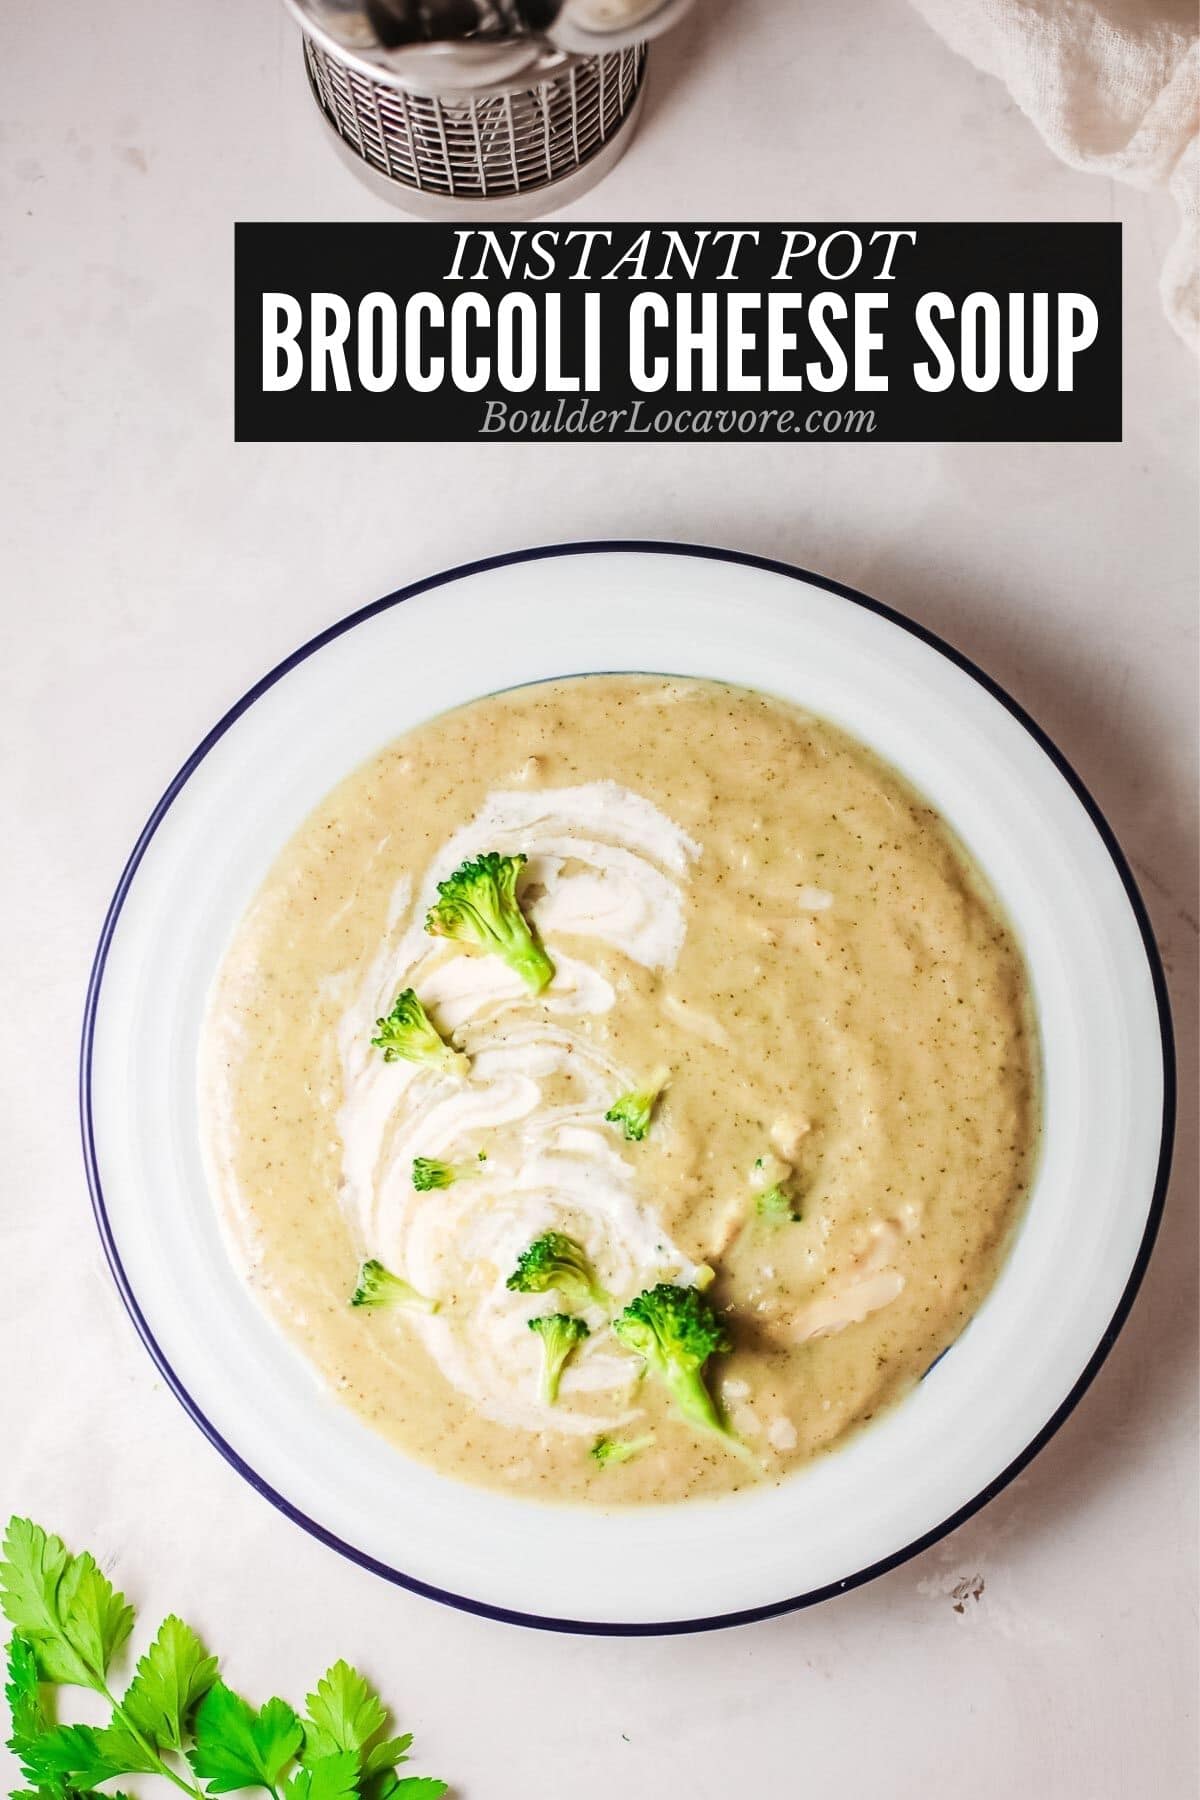 Instant Pot Broccoli Cheese Soup title